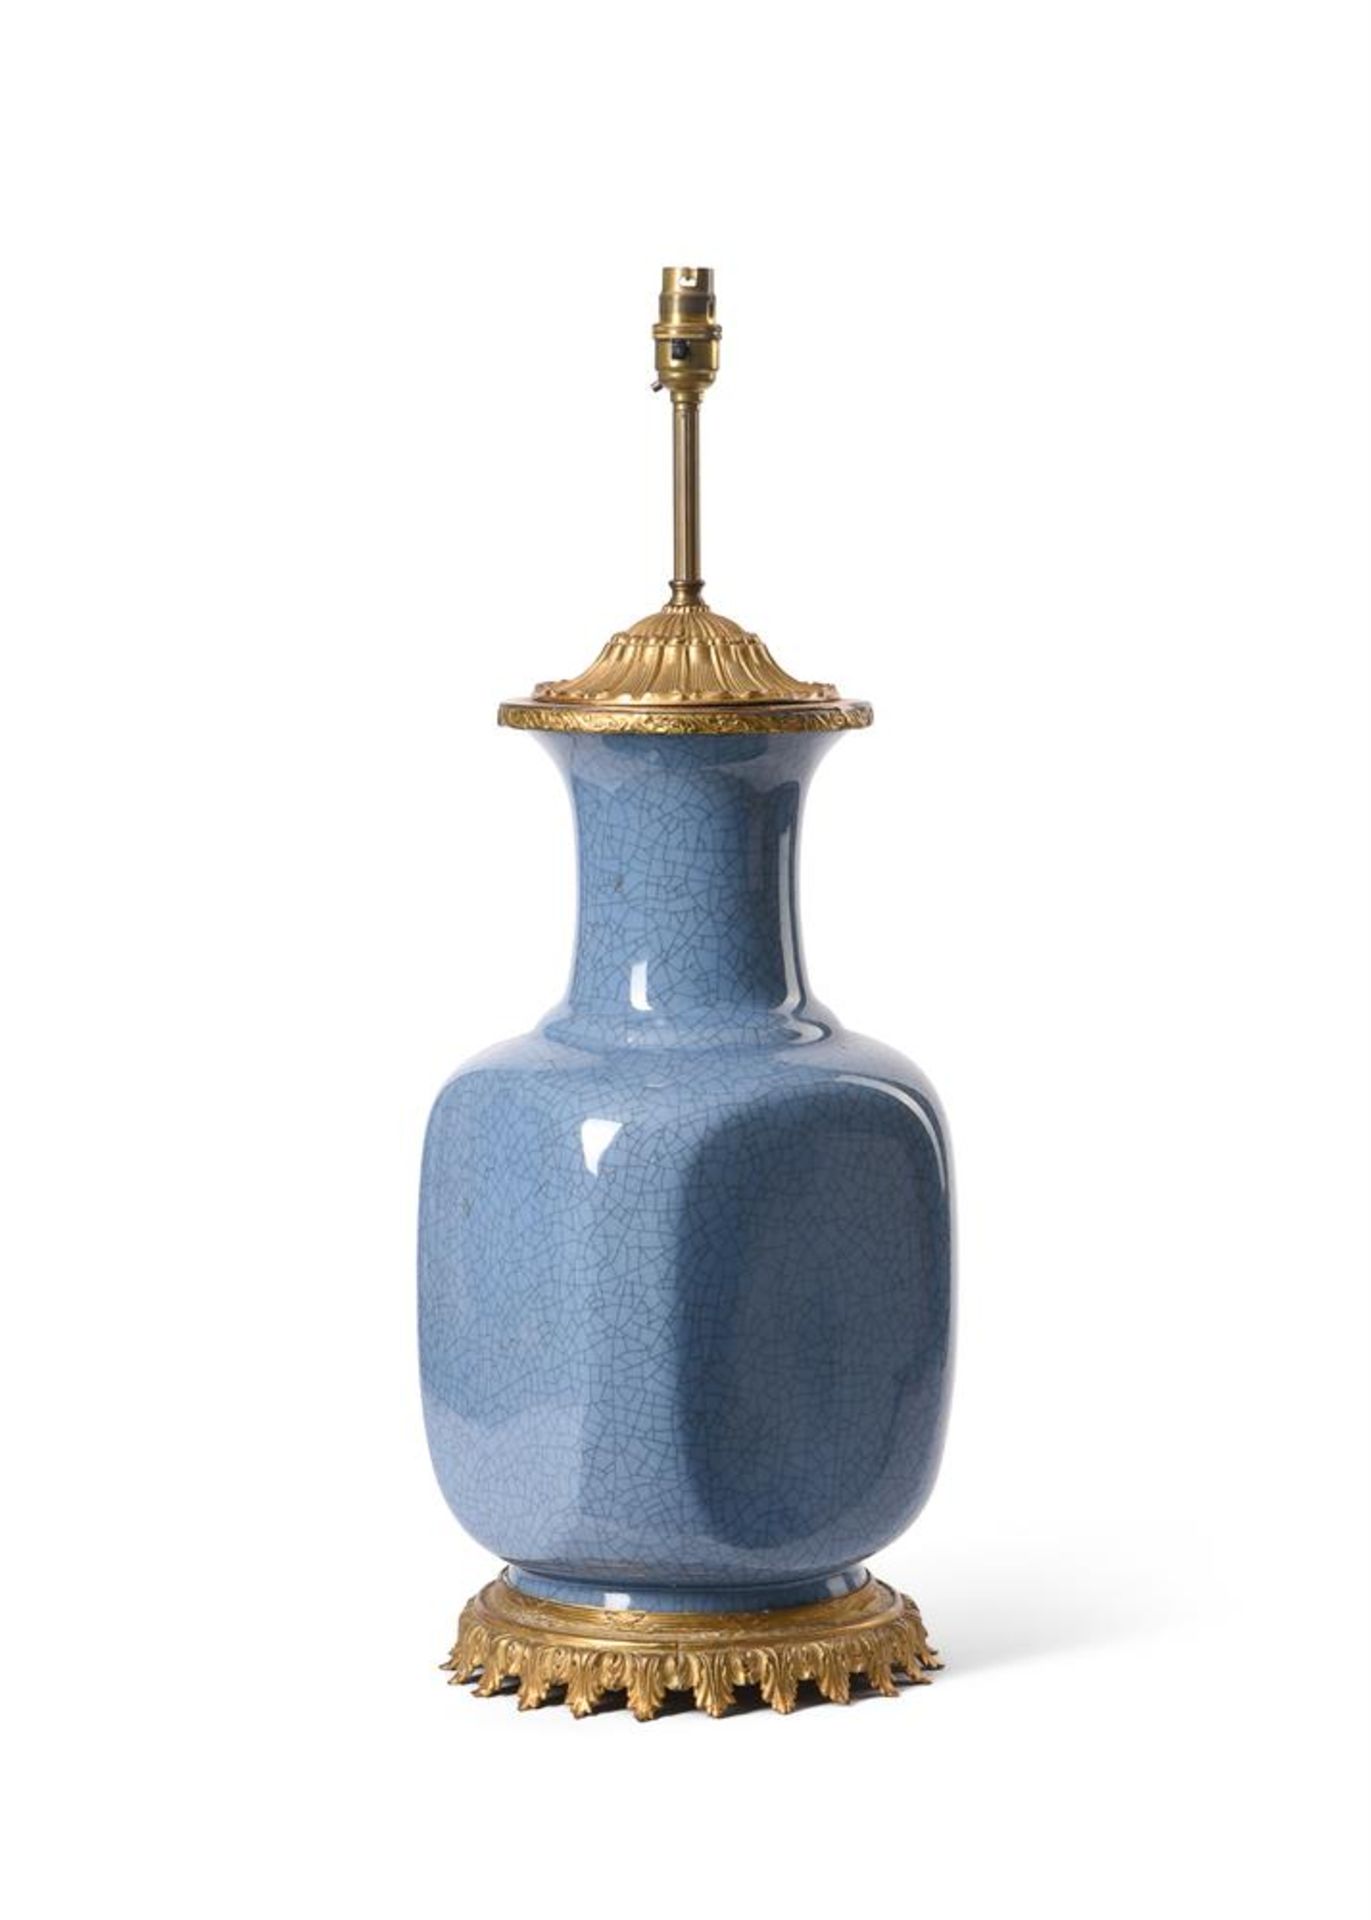 A PAIR OF GILT METAL MOUNTED BLUE CRACKLE GLAZED PORCELAIN TABLE LAMPS - Image 2 of 3